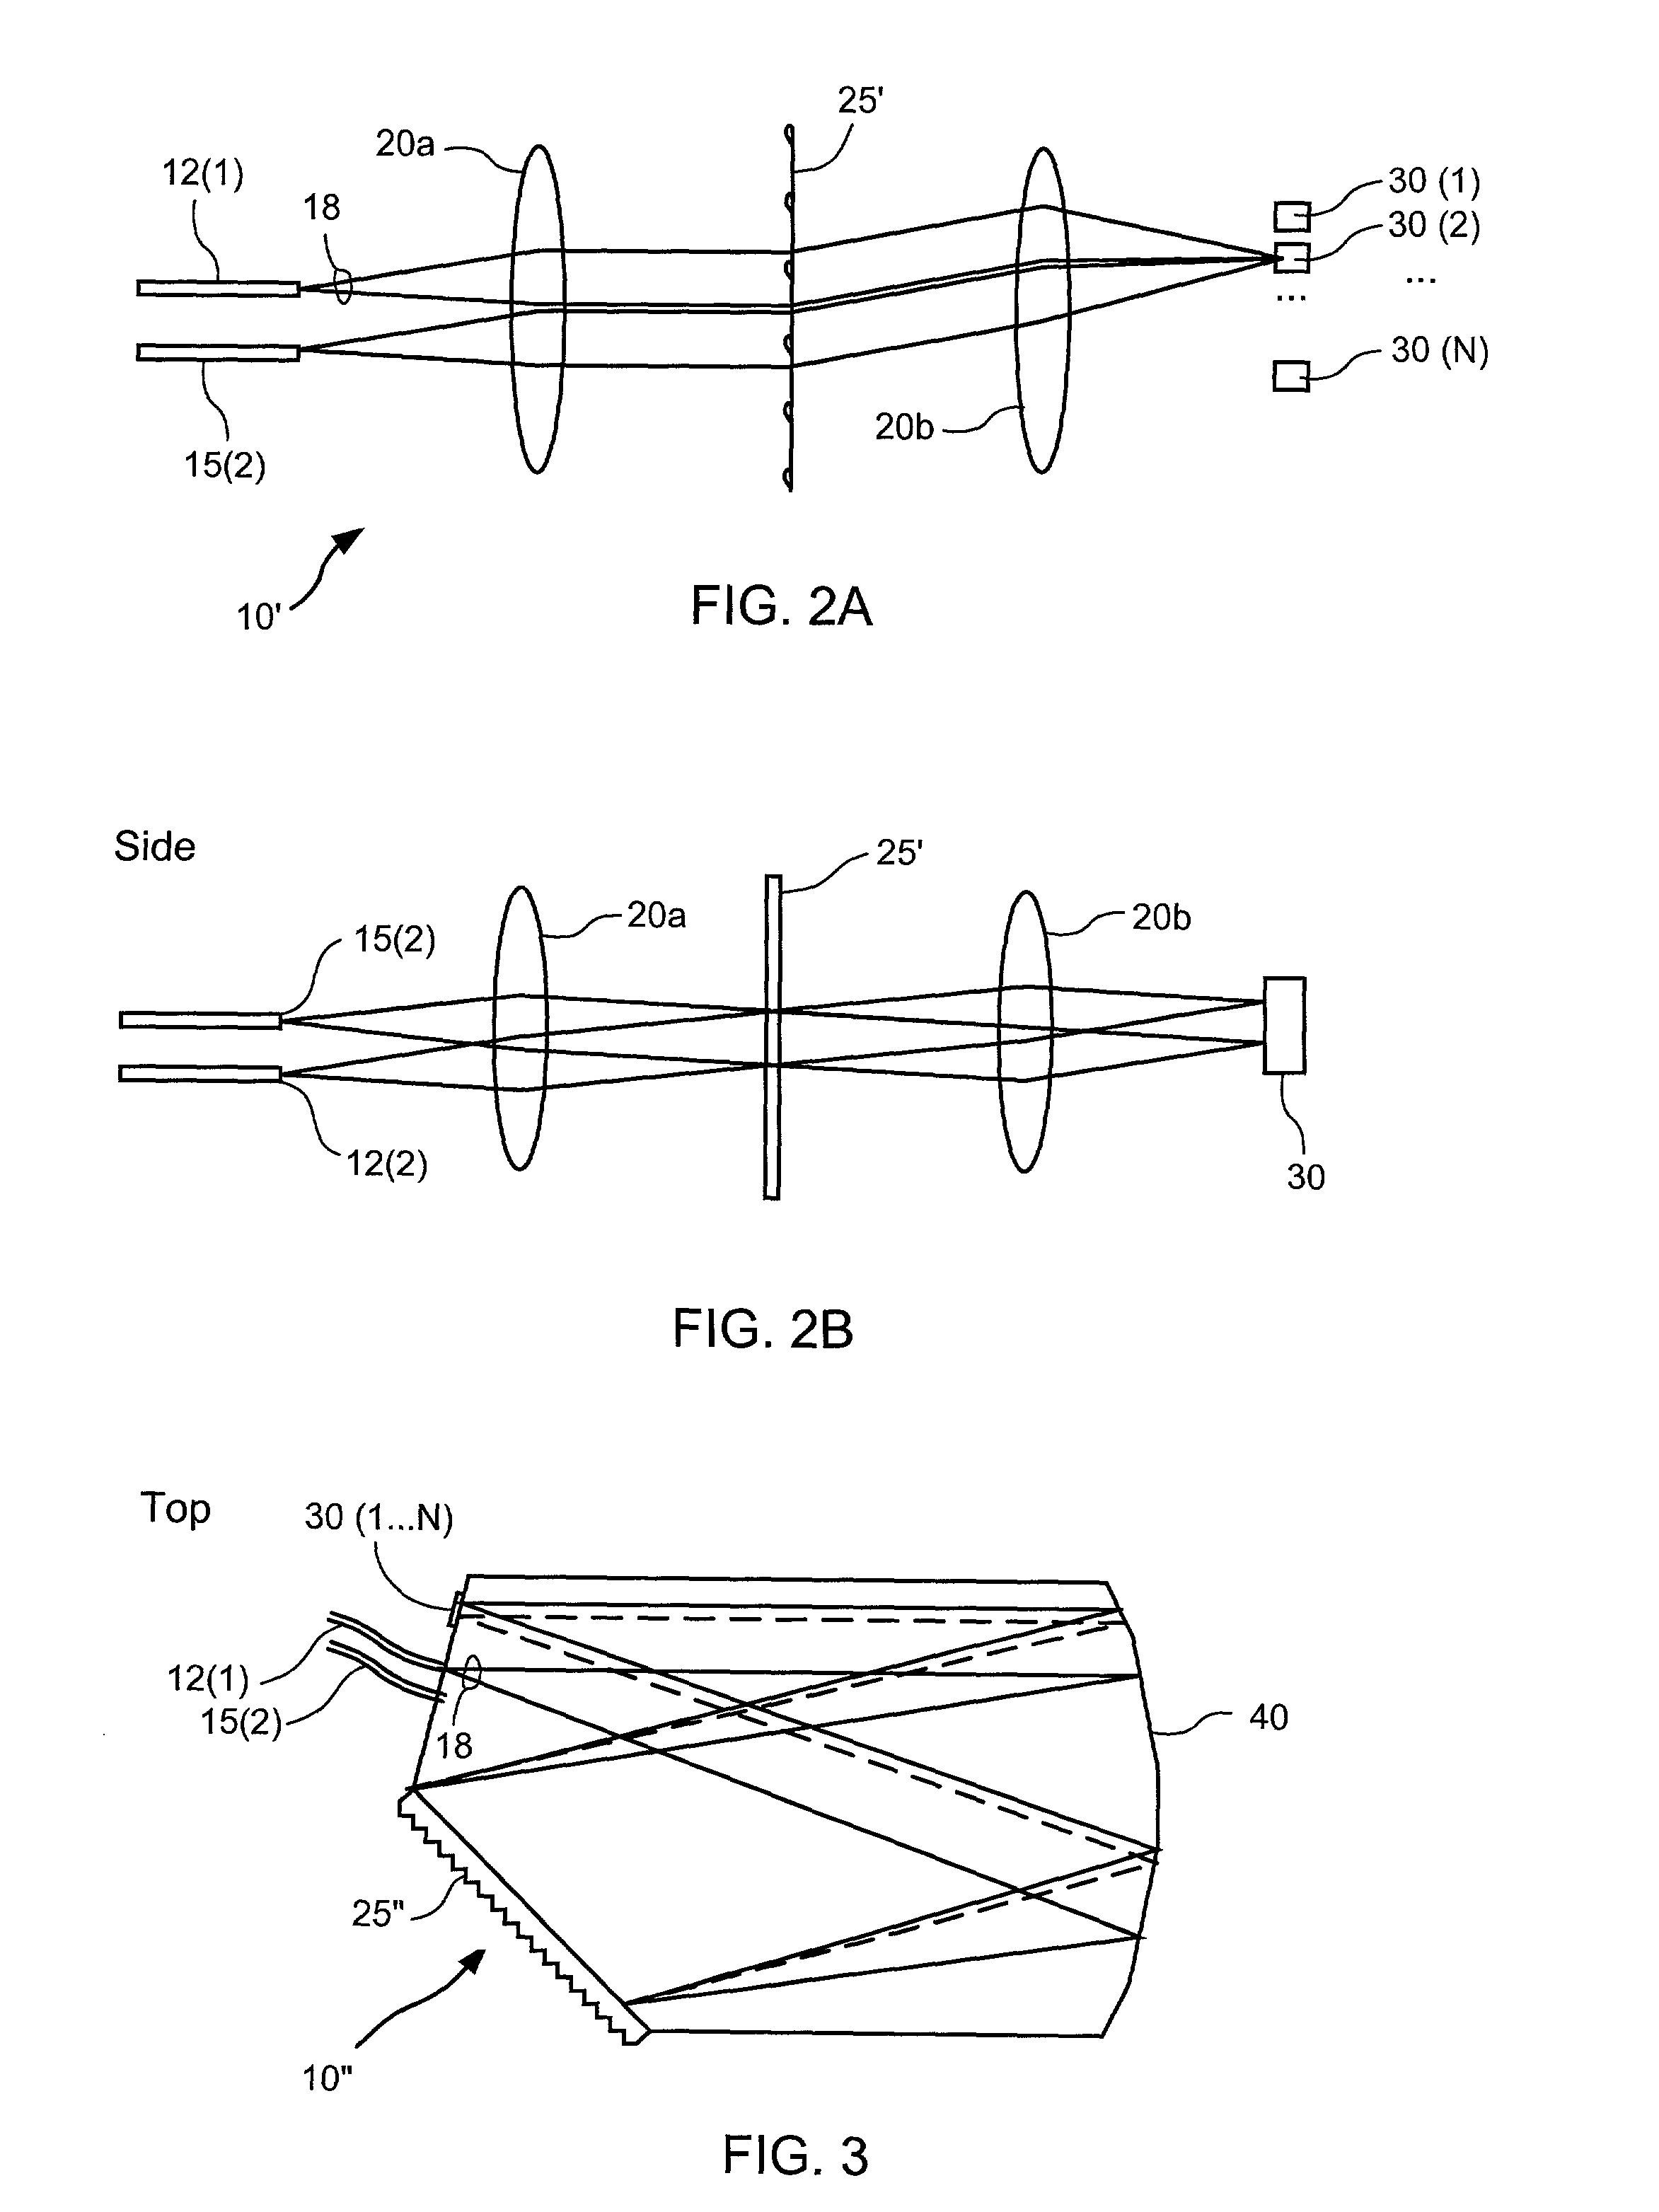 Two-by-two optical routing element using two-position MEMS mirrors